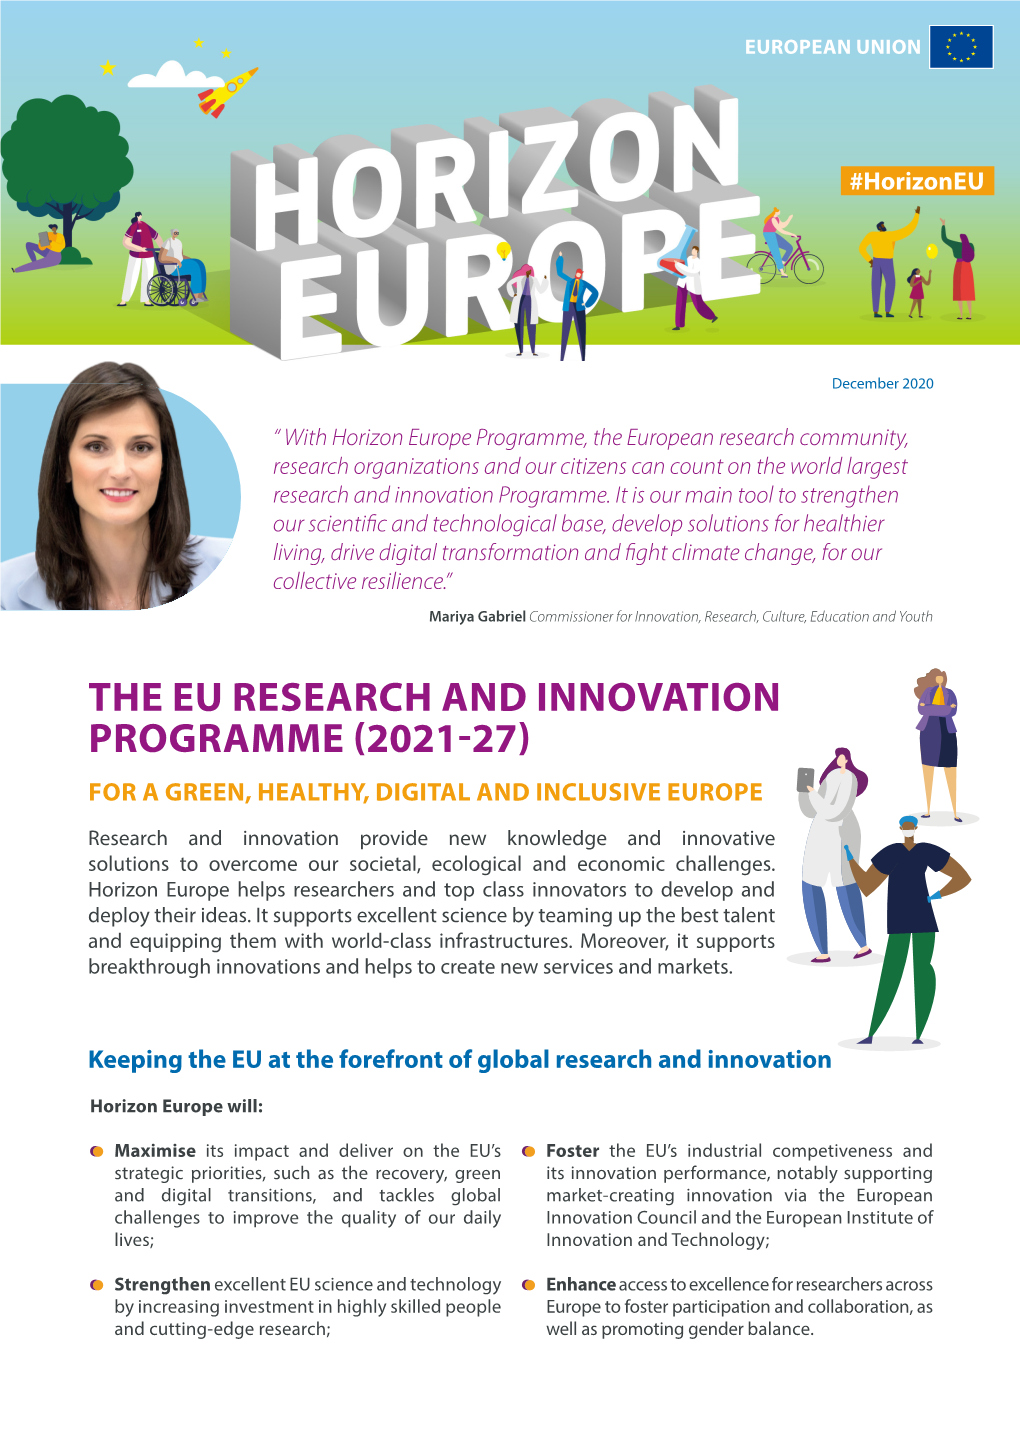 The Eu Research and Innovation Programme (2021-27) for a Green, Healthy, Digital and Inclusive Europe